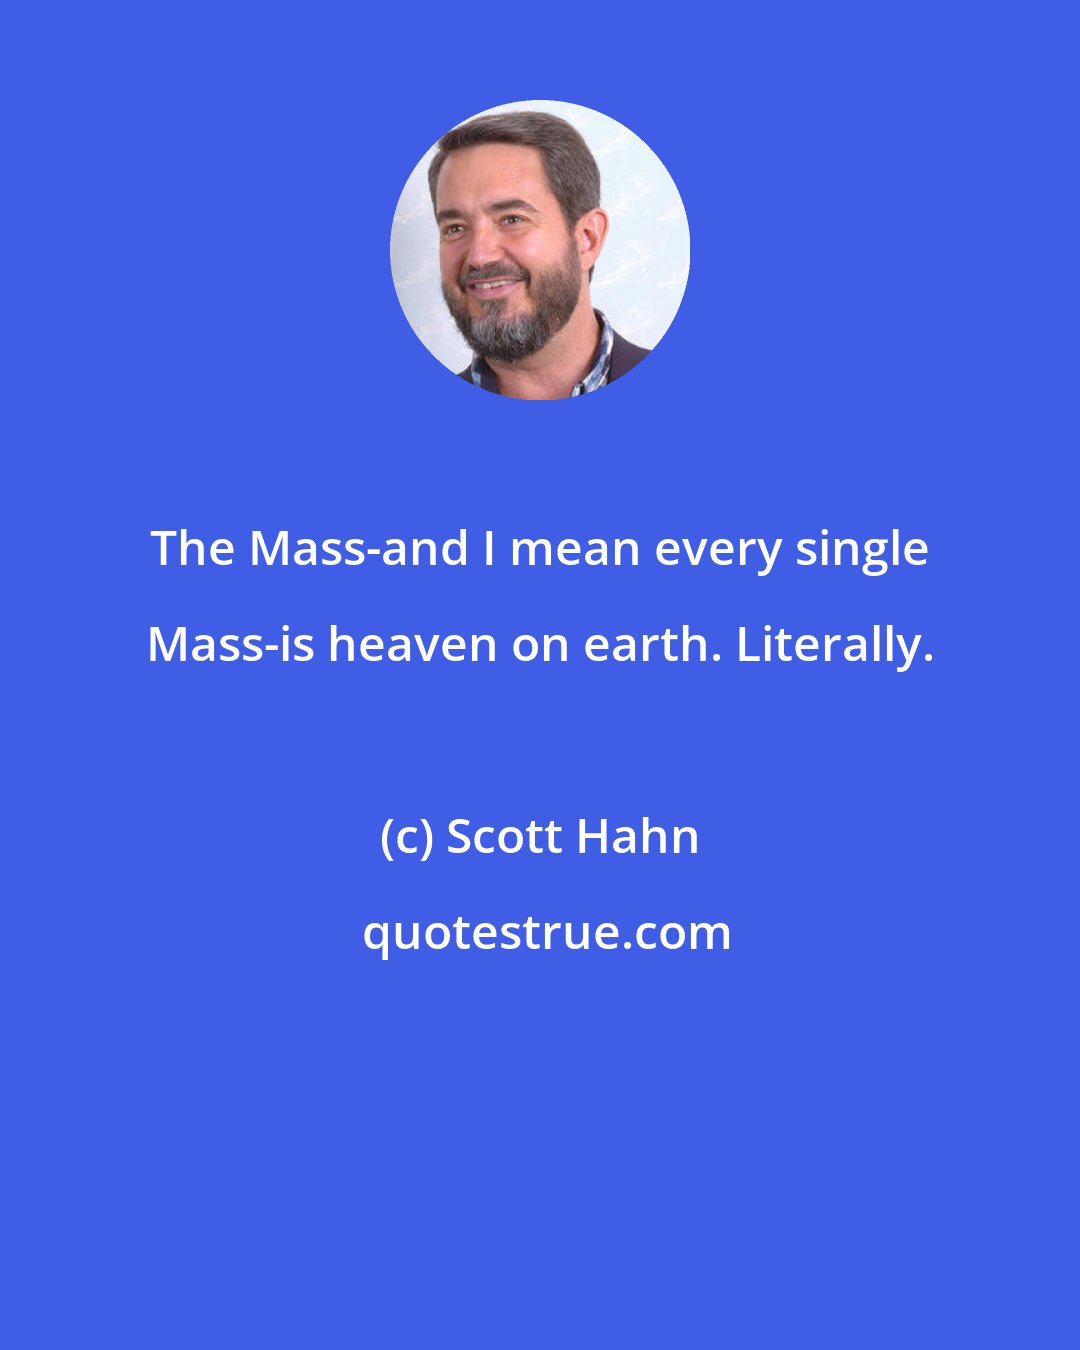 Scott Hahn: The Mass-and I mean every single Mass-is heaven on earth. Literally.